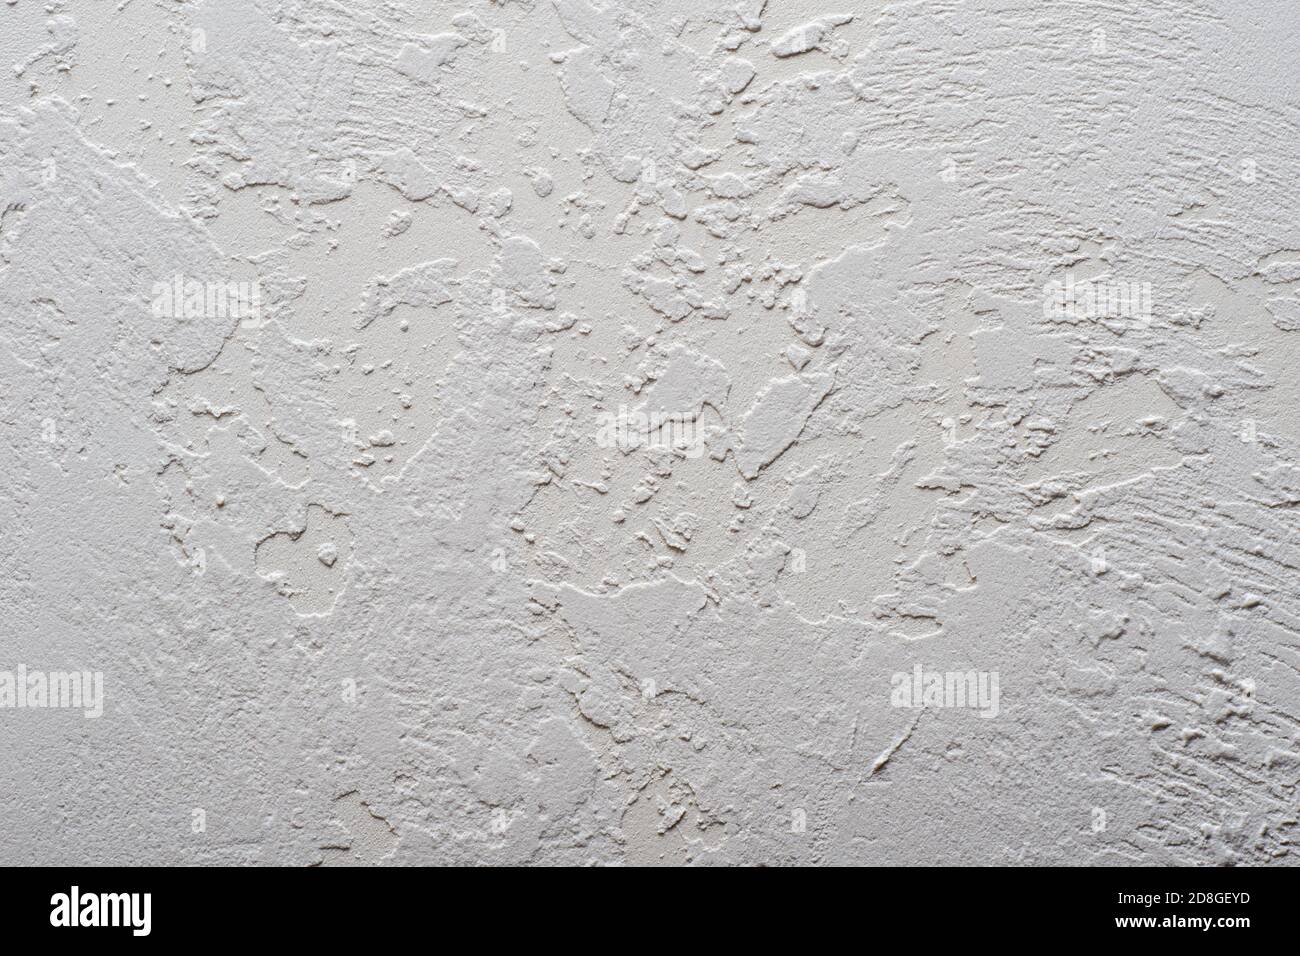 Plaster graphic stains, uneven ancient stone for paint application, background Stock Photo